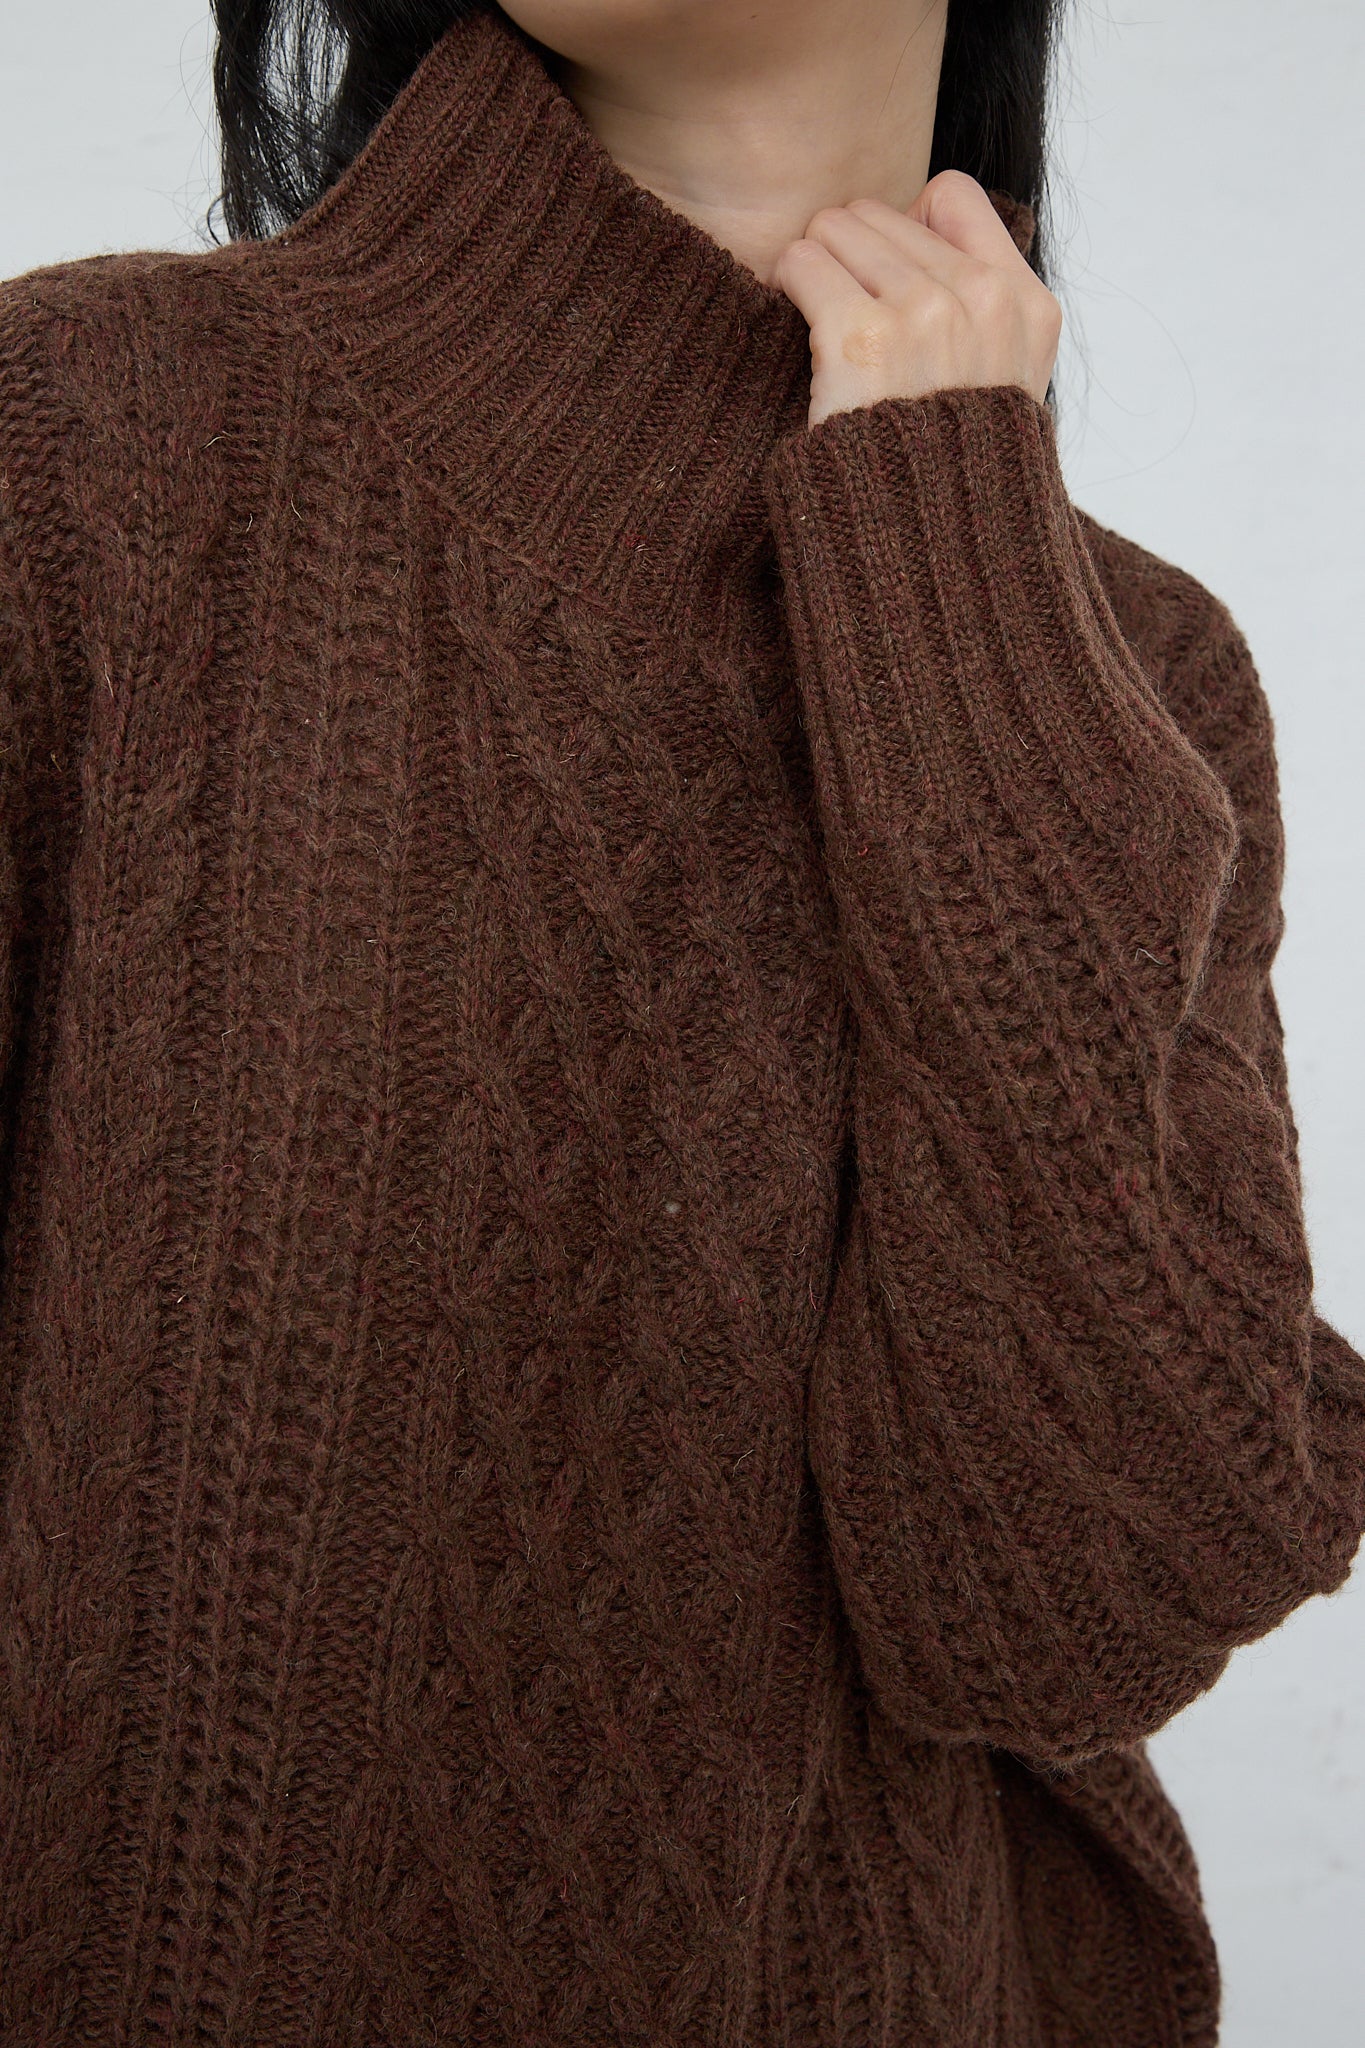 An Ichi Knit Turtleneck Pullover in Brown, a relaxed fit turtleneck pullover in a patterned wool blend. Up close.